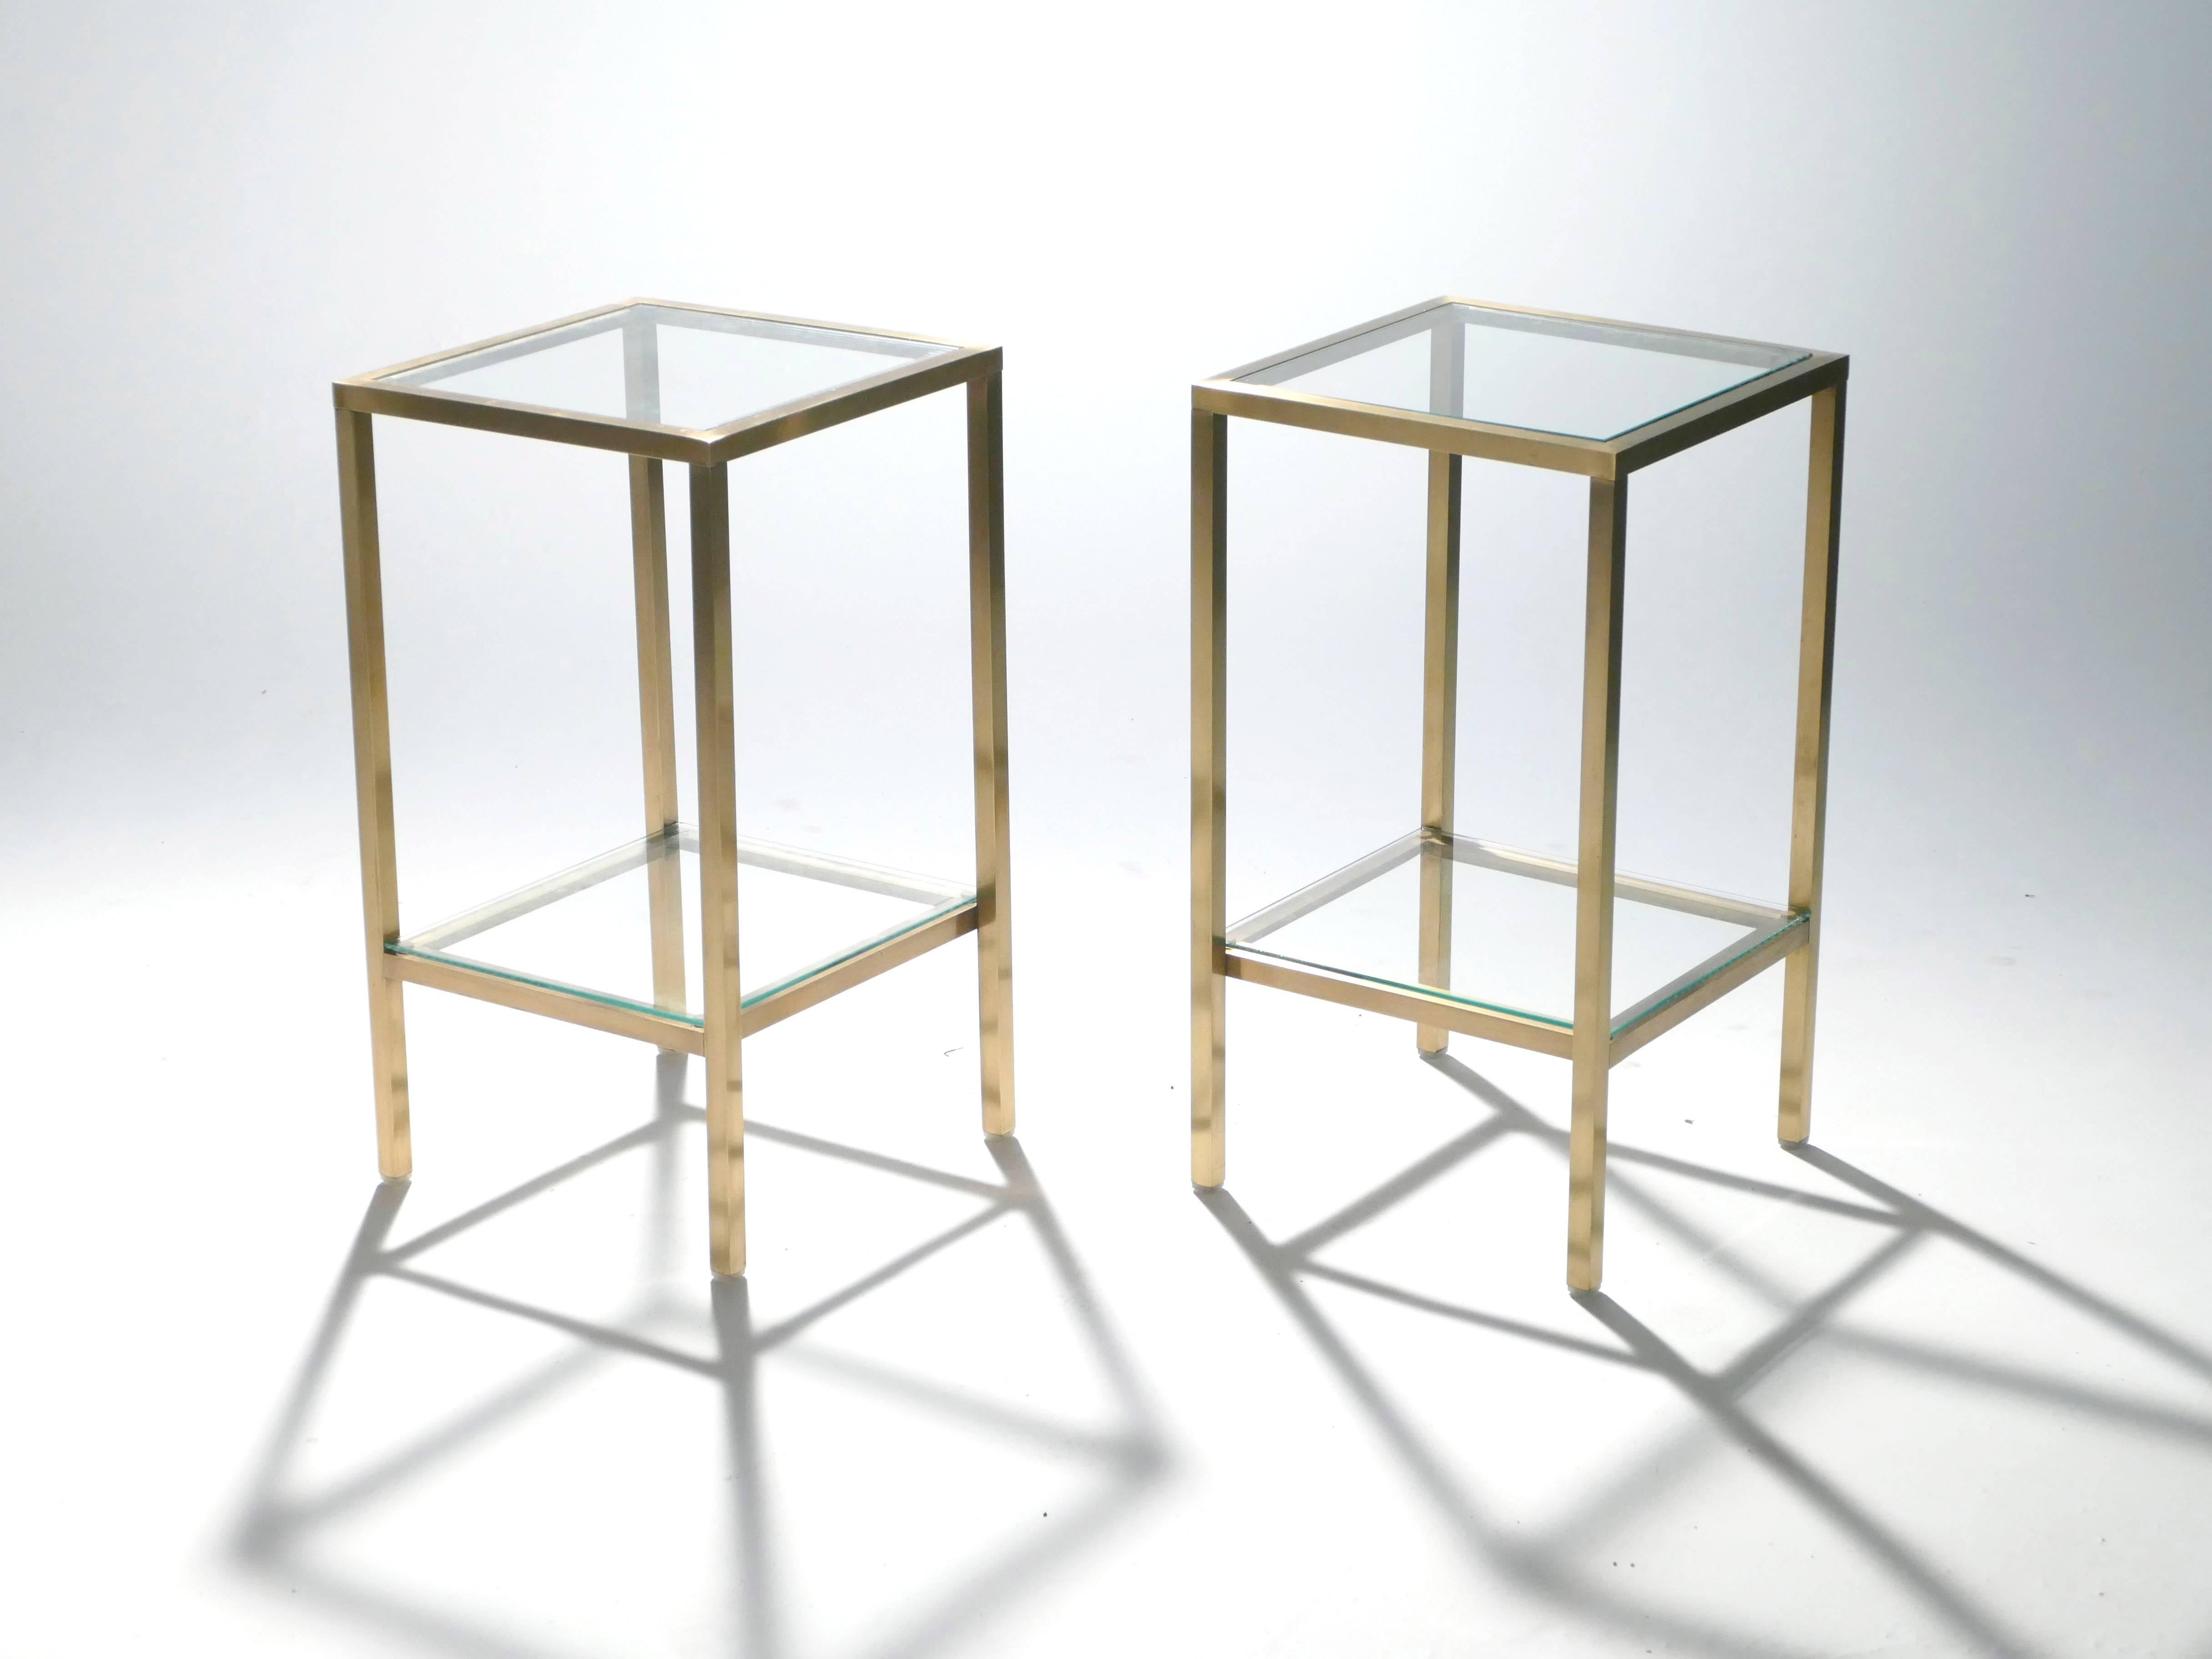 These versatile and Classic tables work equally well as bedside tables or living room side tables. Their sleek design is highlighted through strong brass feet and a transparent glass top, making them a perfect choice to incorporate midcentury